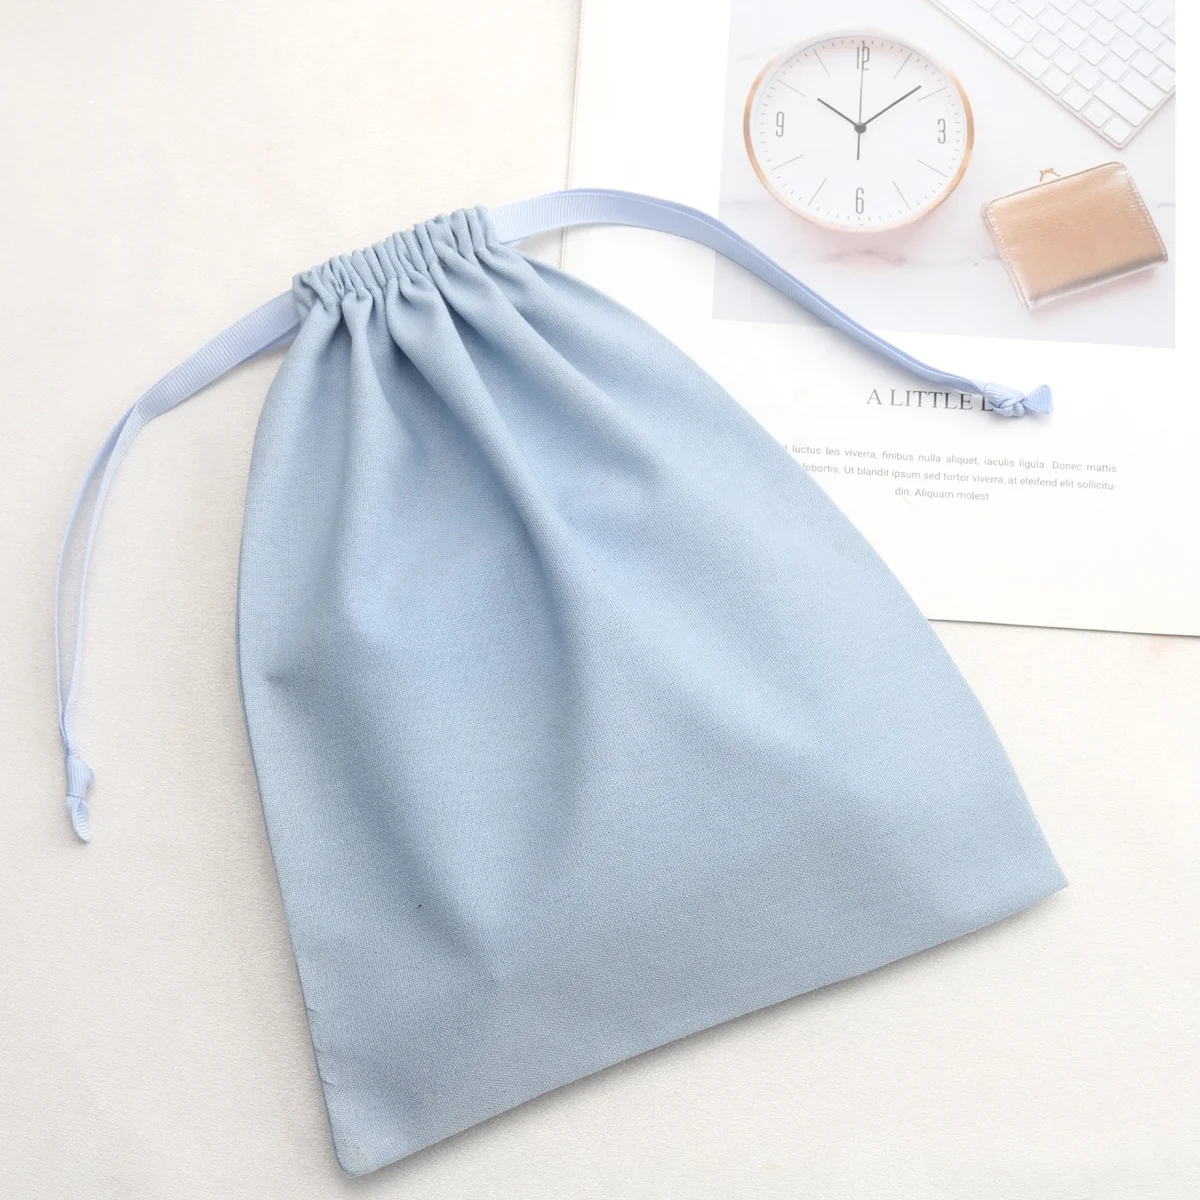 Wholesale Custom Cotton Linen Shoe Packing Storage Bag Blue Muslin Clothing Gift Drawstring Dust Pouch